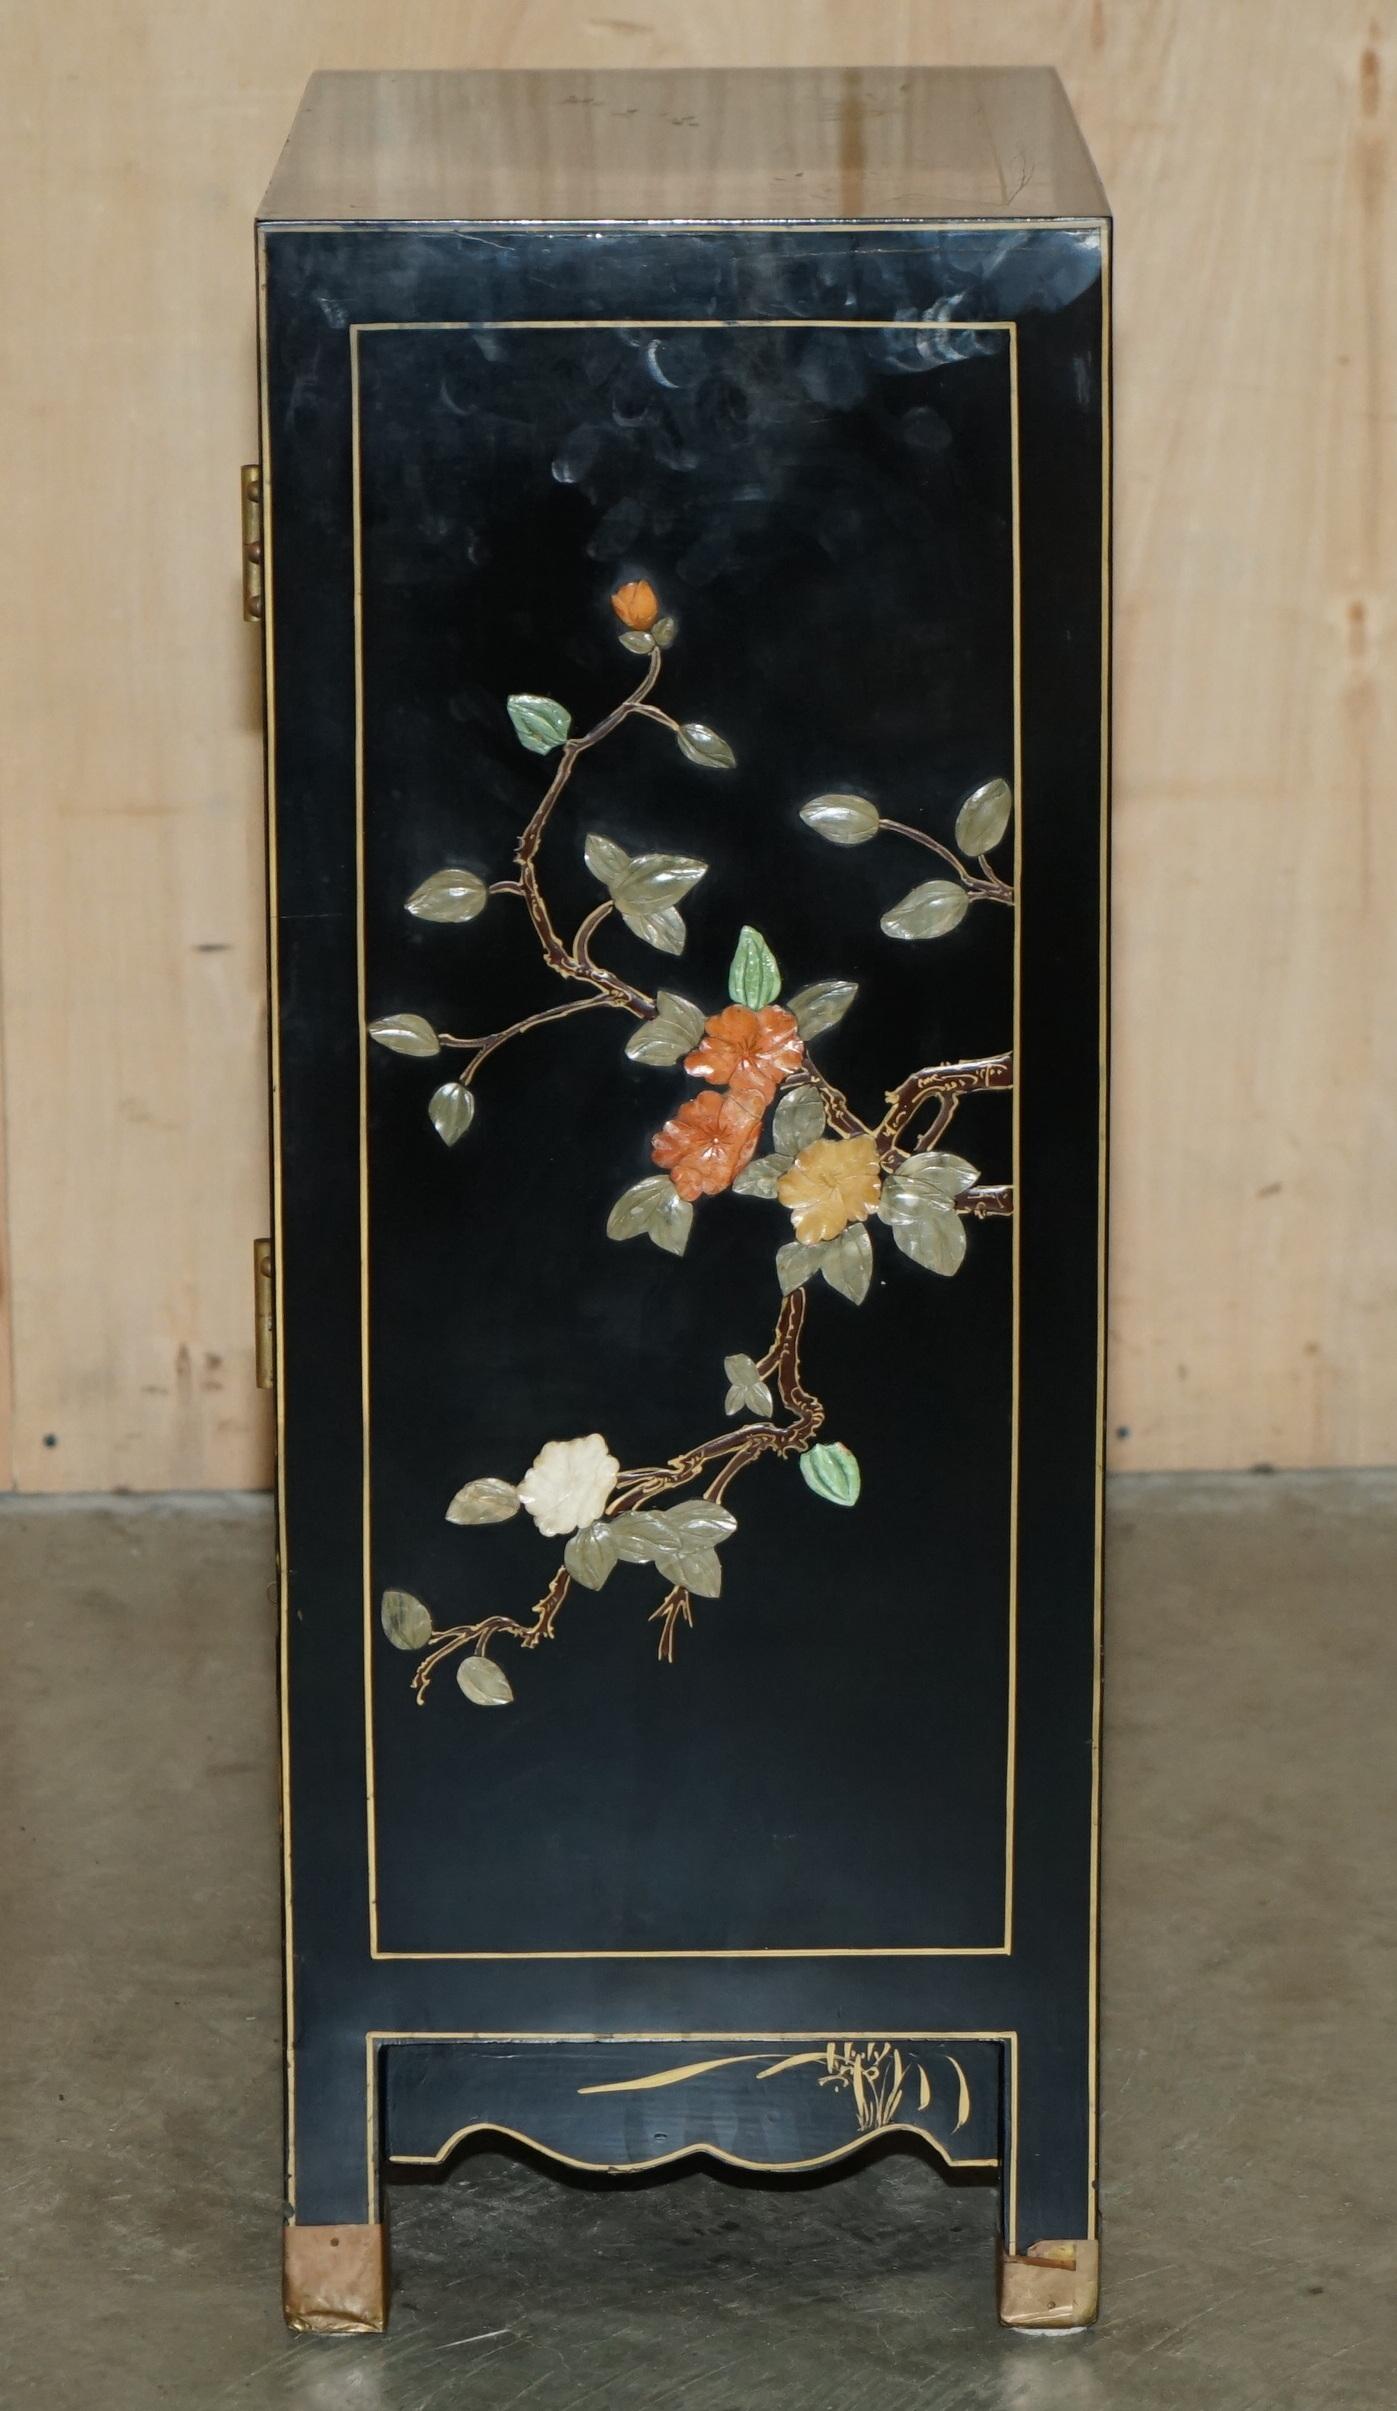 LOVELY ViNTAGE CHINESE CHINOISERIE SAMURAI WARRIOR LACQUER SIDE CABINET SOAPSTON For Sale 5